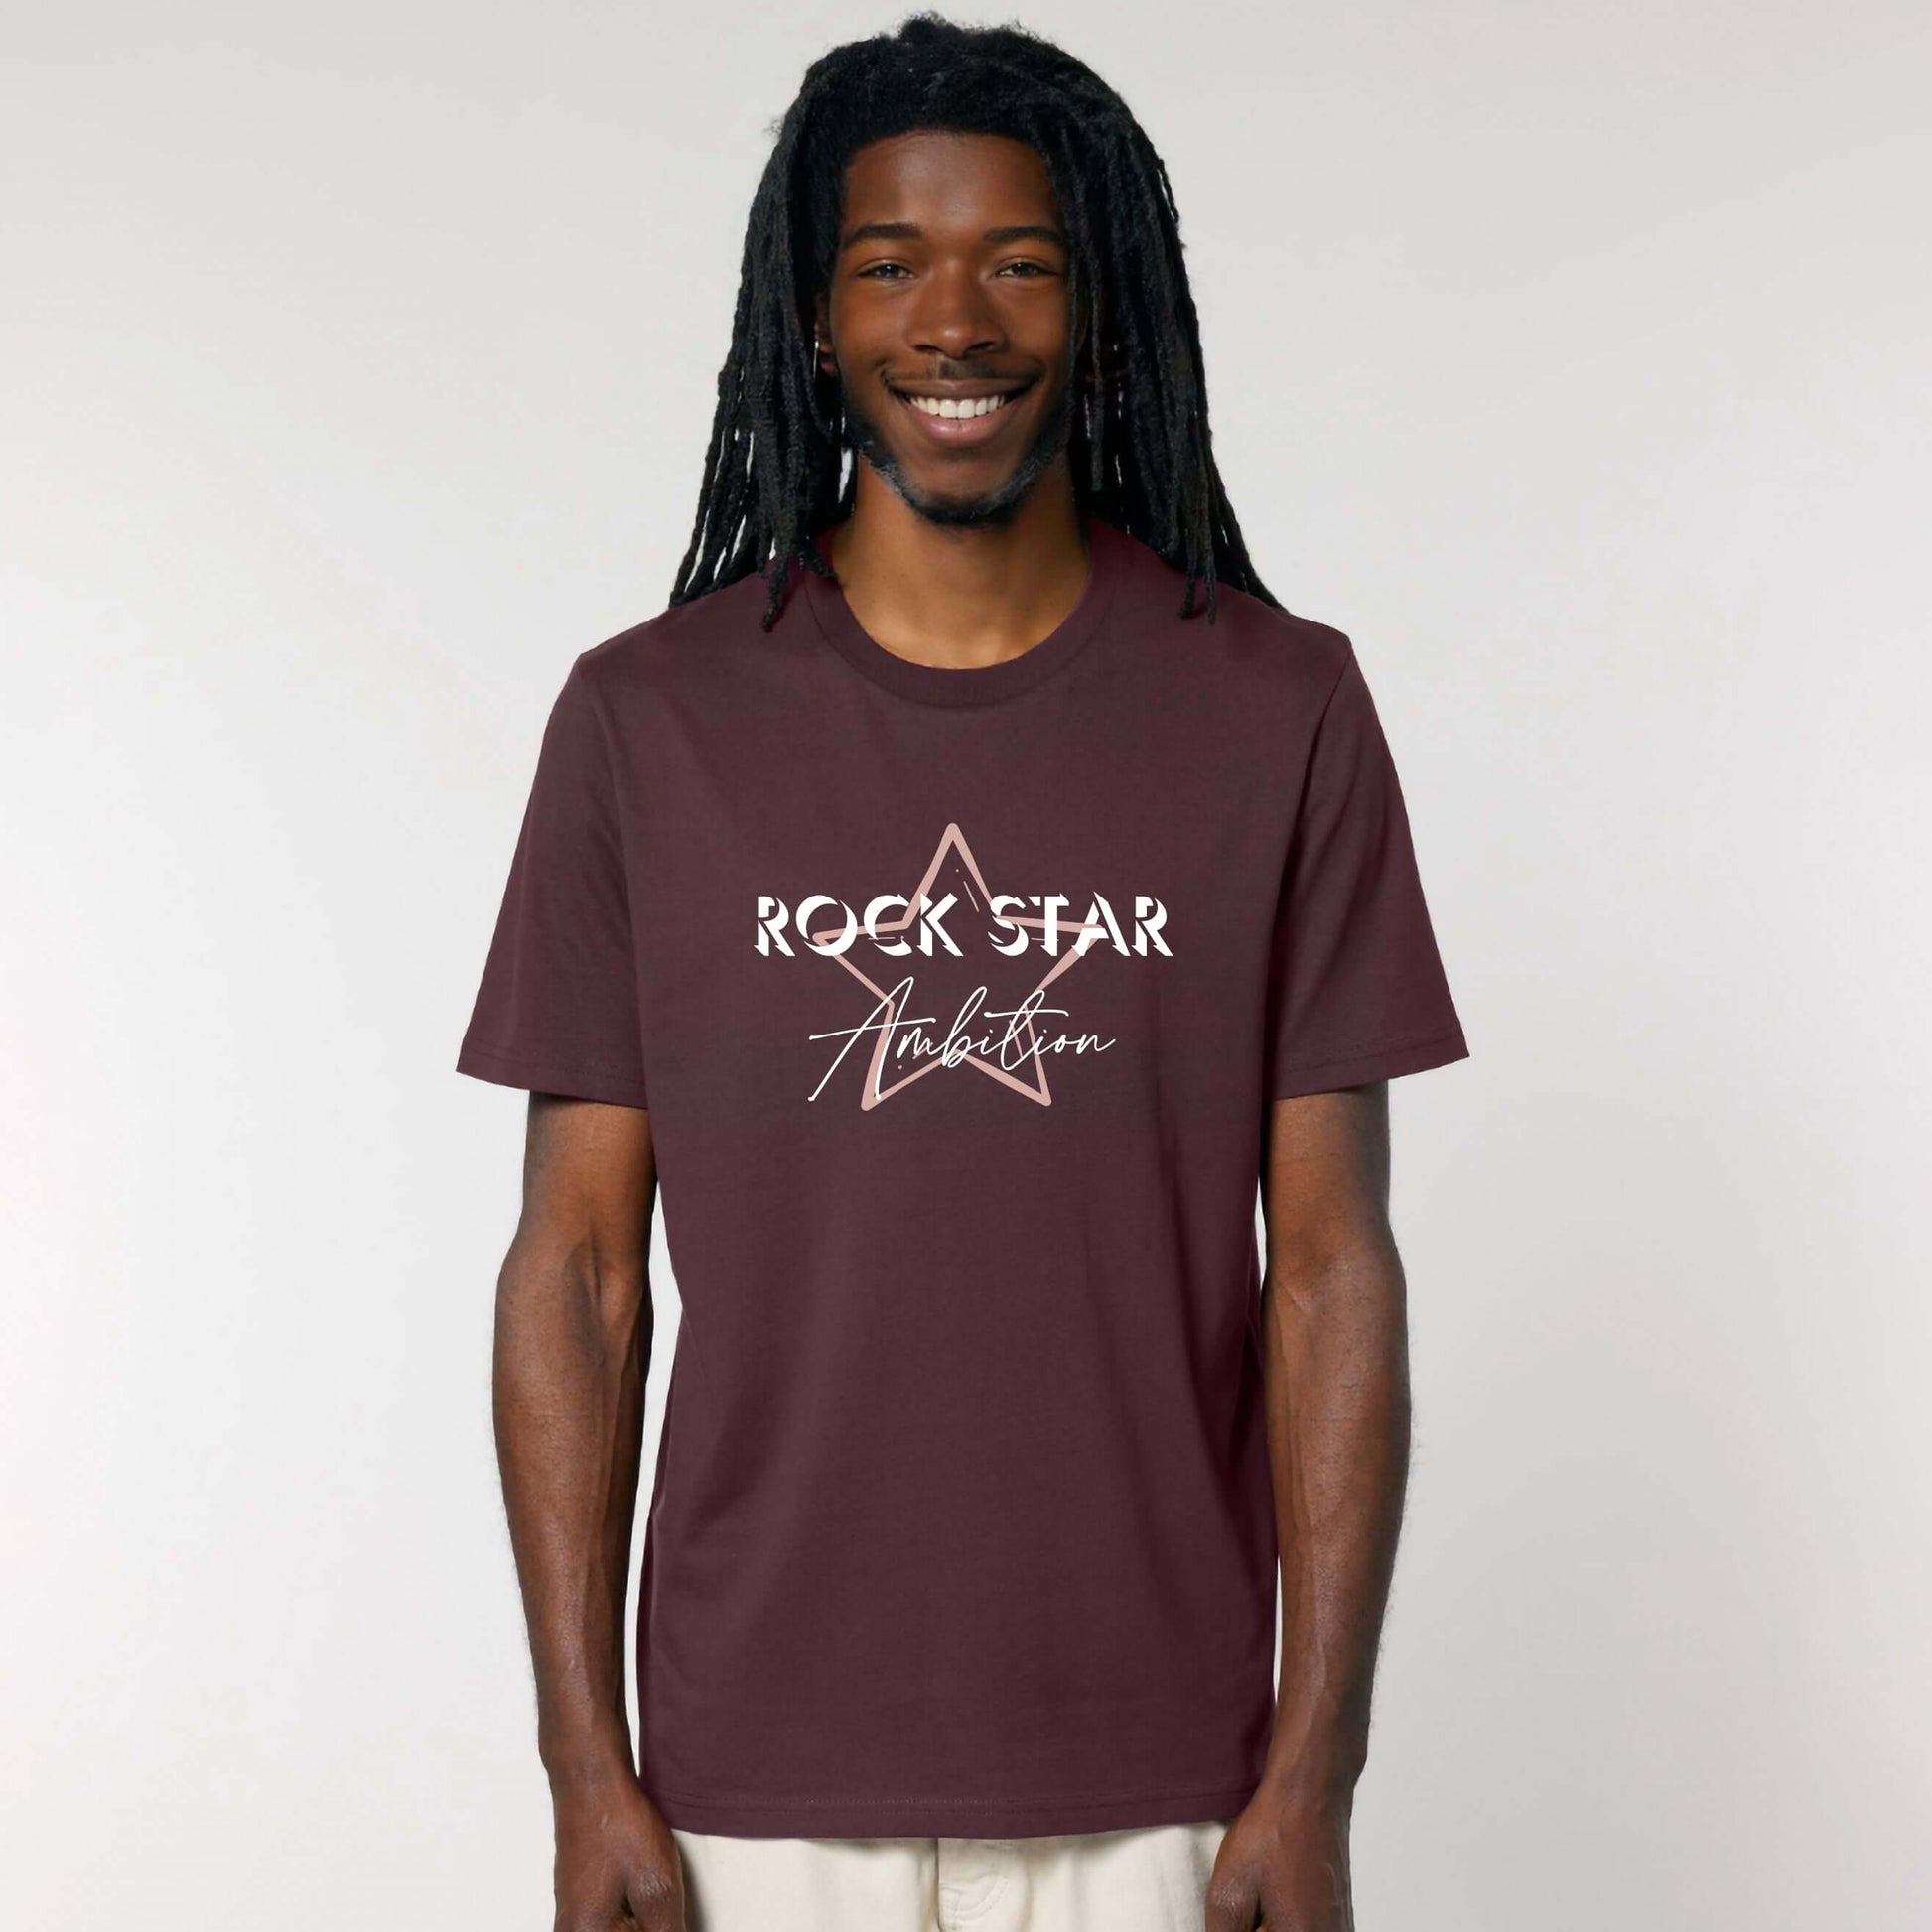 Organic Cotton Unisex relaxed fit short sleeve t shirt. Man wearing men's dark red -brown short sleeve graphic tshirt. Crew neck casual wear. Band Tee Design is pale peach star outline behind wording ROCK STAR in upper case shadowed  white text, then Ambition below in script. Rock music themed unisex top